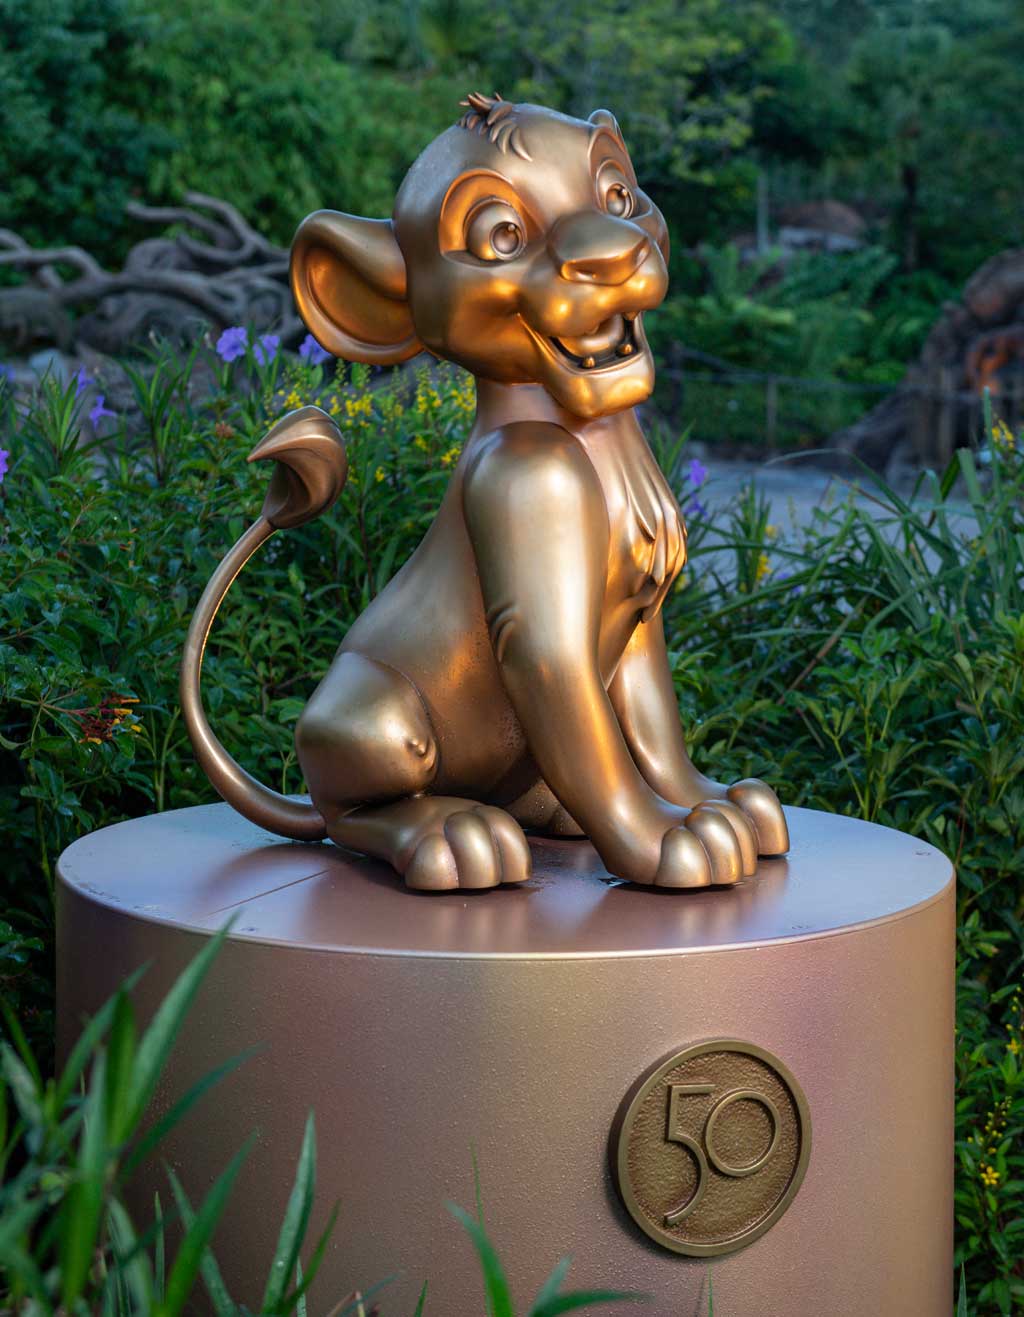 Simba at Disney’s Animal Kingdom Theme Park is one of the “Disney Fab 50 Character Collection” appearing in all four Walt Disney World Resort theme parks in Lake Buena Vista, Fla., as part of “The World’s Most Magical Celebration,” beginning Oct. 1, 2021, in honor of the resort’s 50th anniversary. (David Roark, photographer)